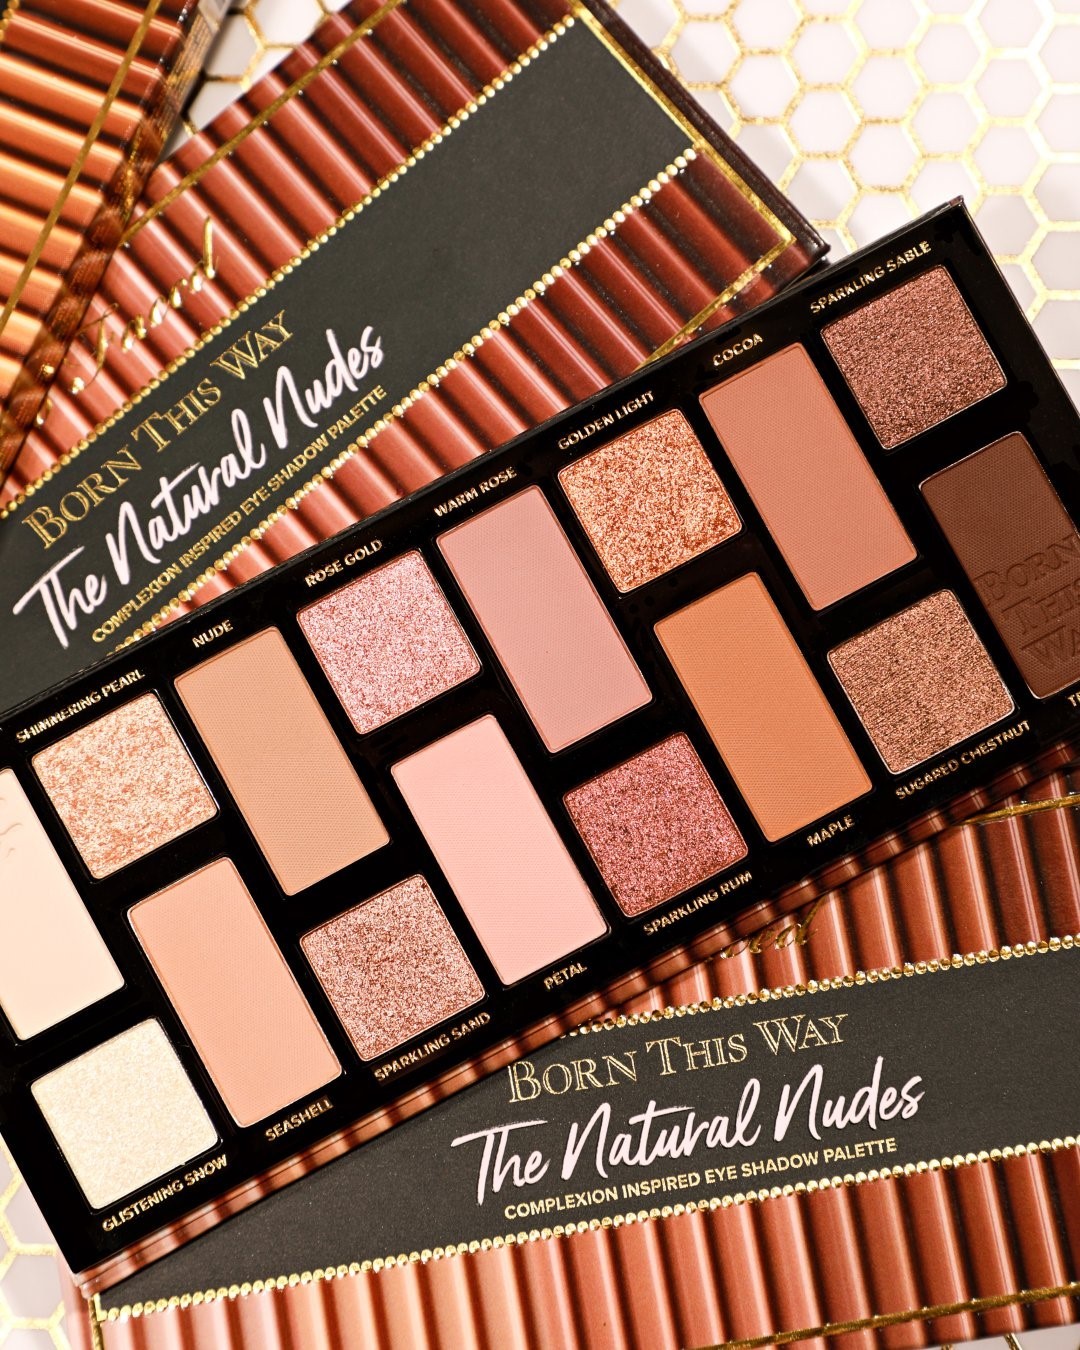 Too Faced Cosmetics - All of the nudes you need in one palette. ✨ Who's FALLIN' for these modern nude shades in our Born This Way Eye Shadow Palette? 🙋‍♀️ Available @Sephora. #tfbornthisway #toofaced